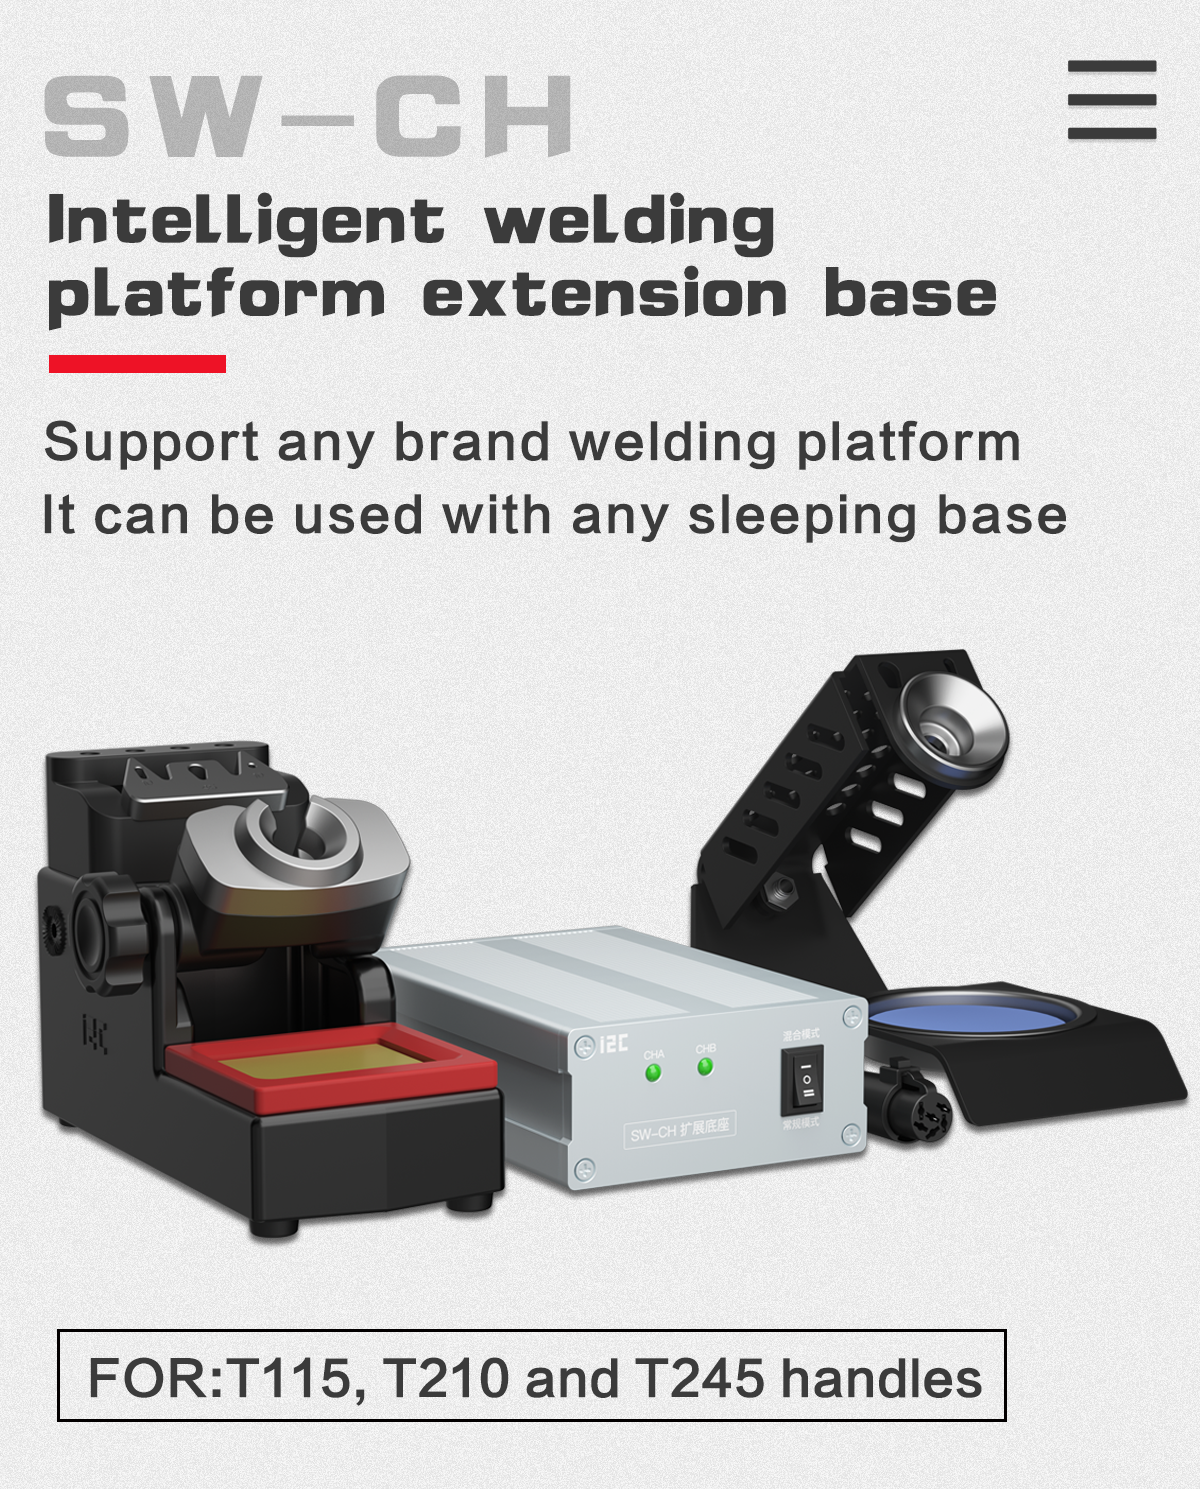 Intelligent Welding table expand base SW-CH(图2)